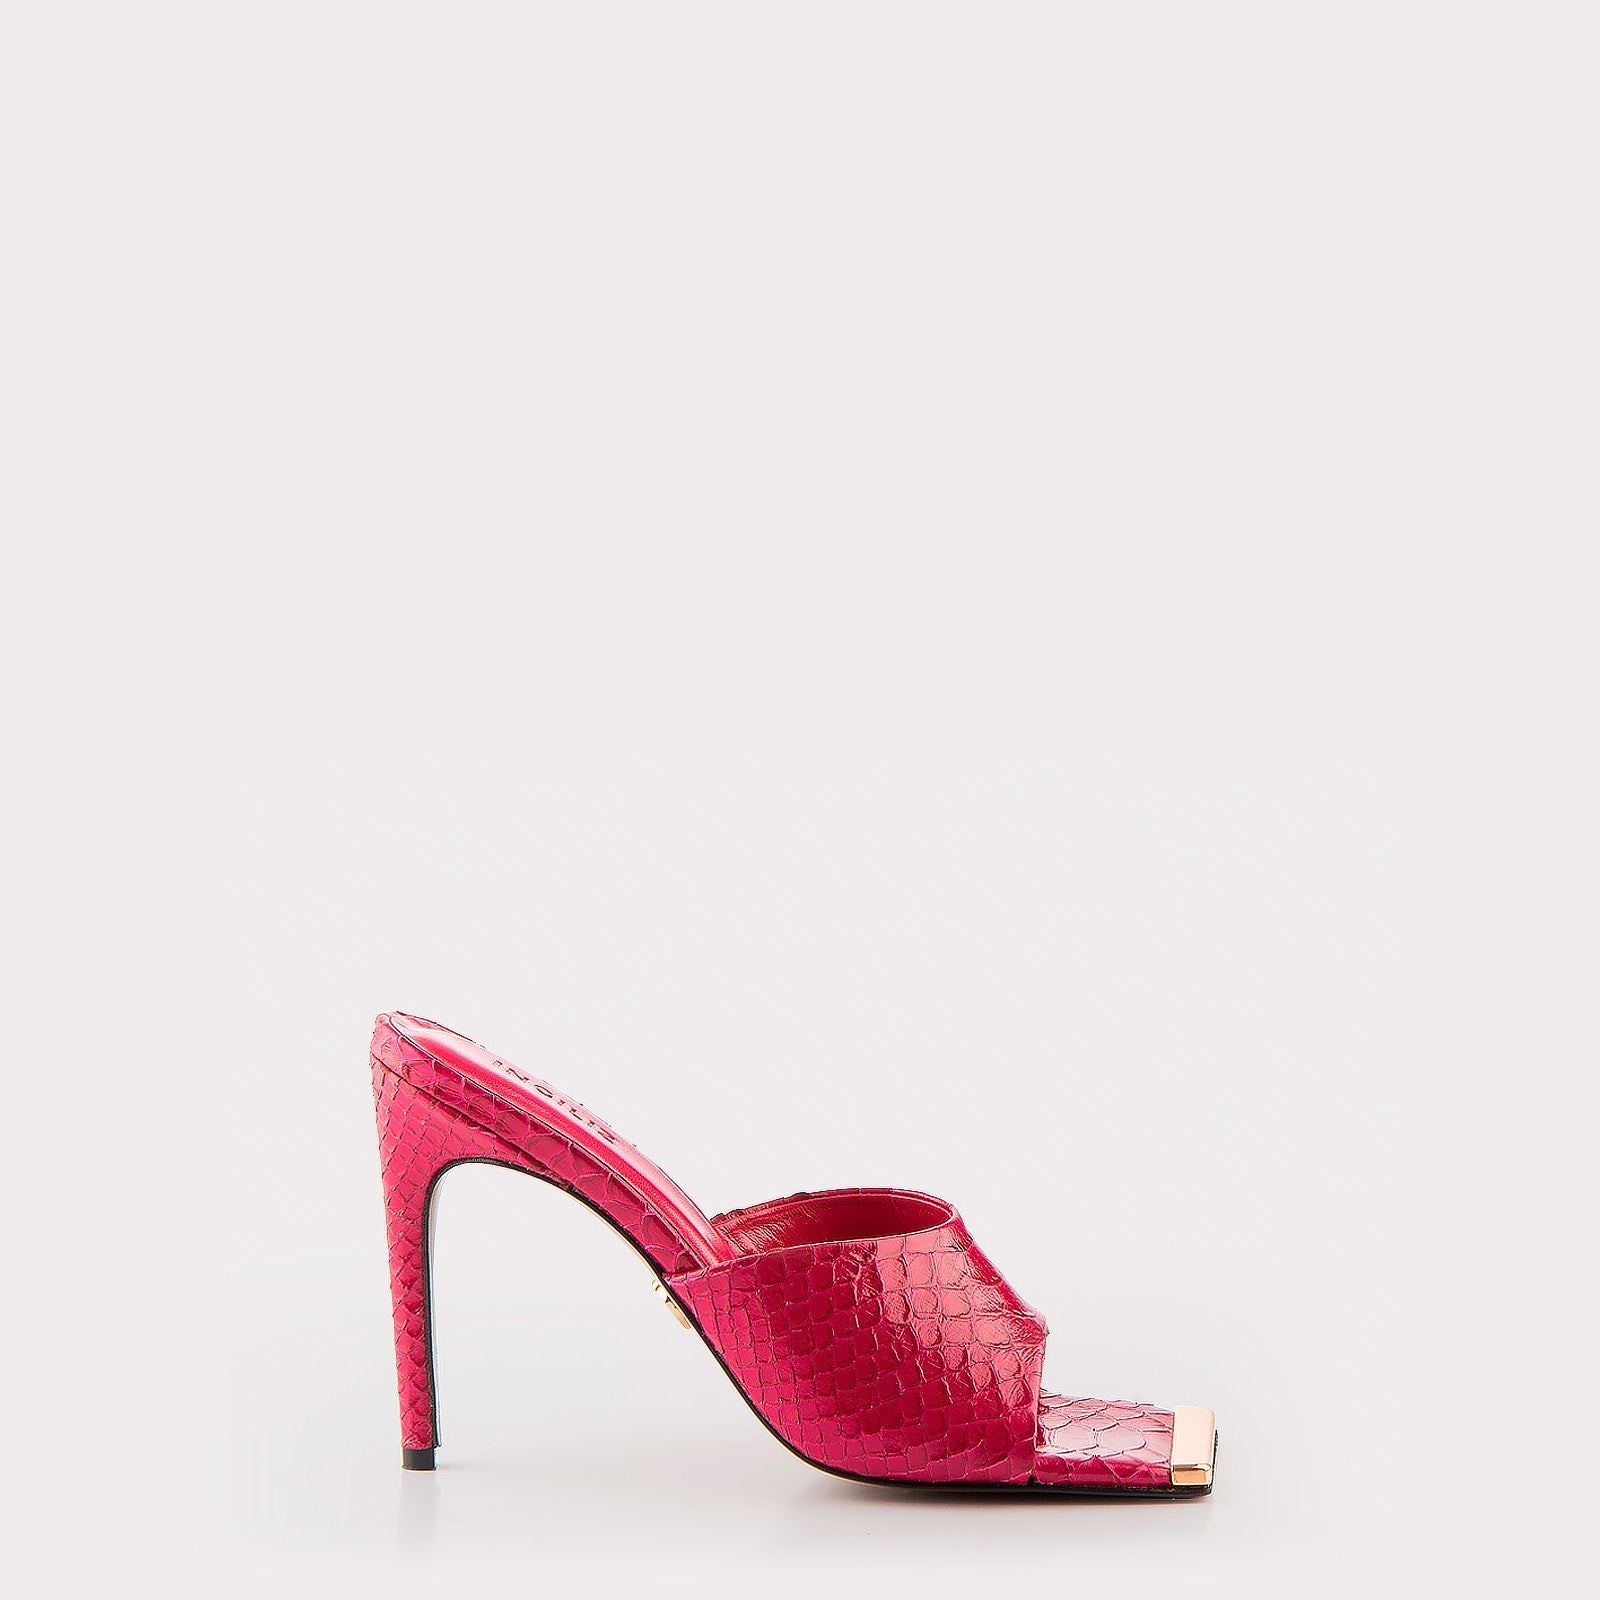 TEXTURED LEATHER MULES KALINA FUXIA